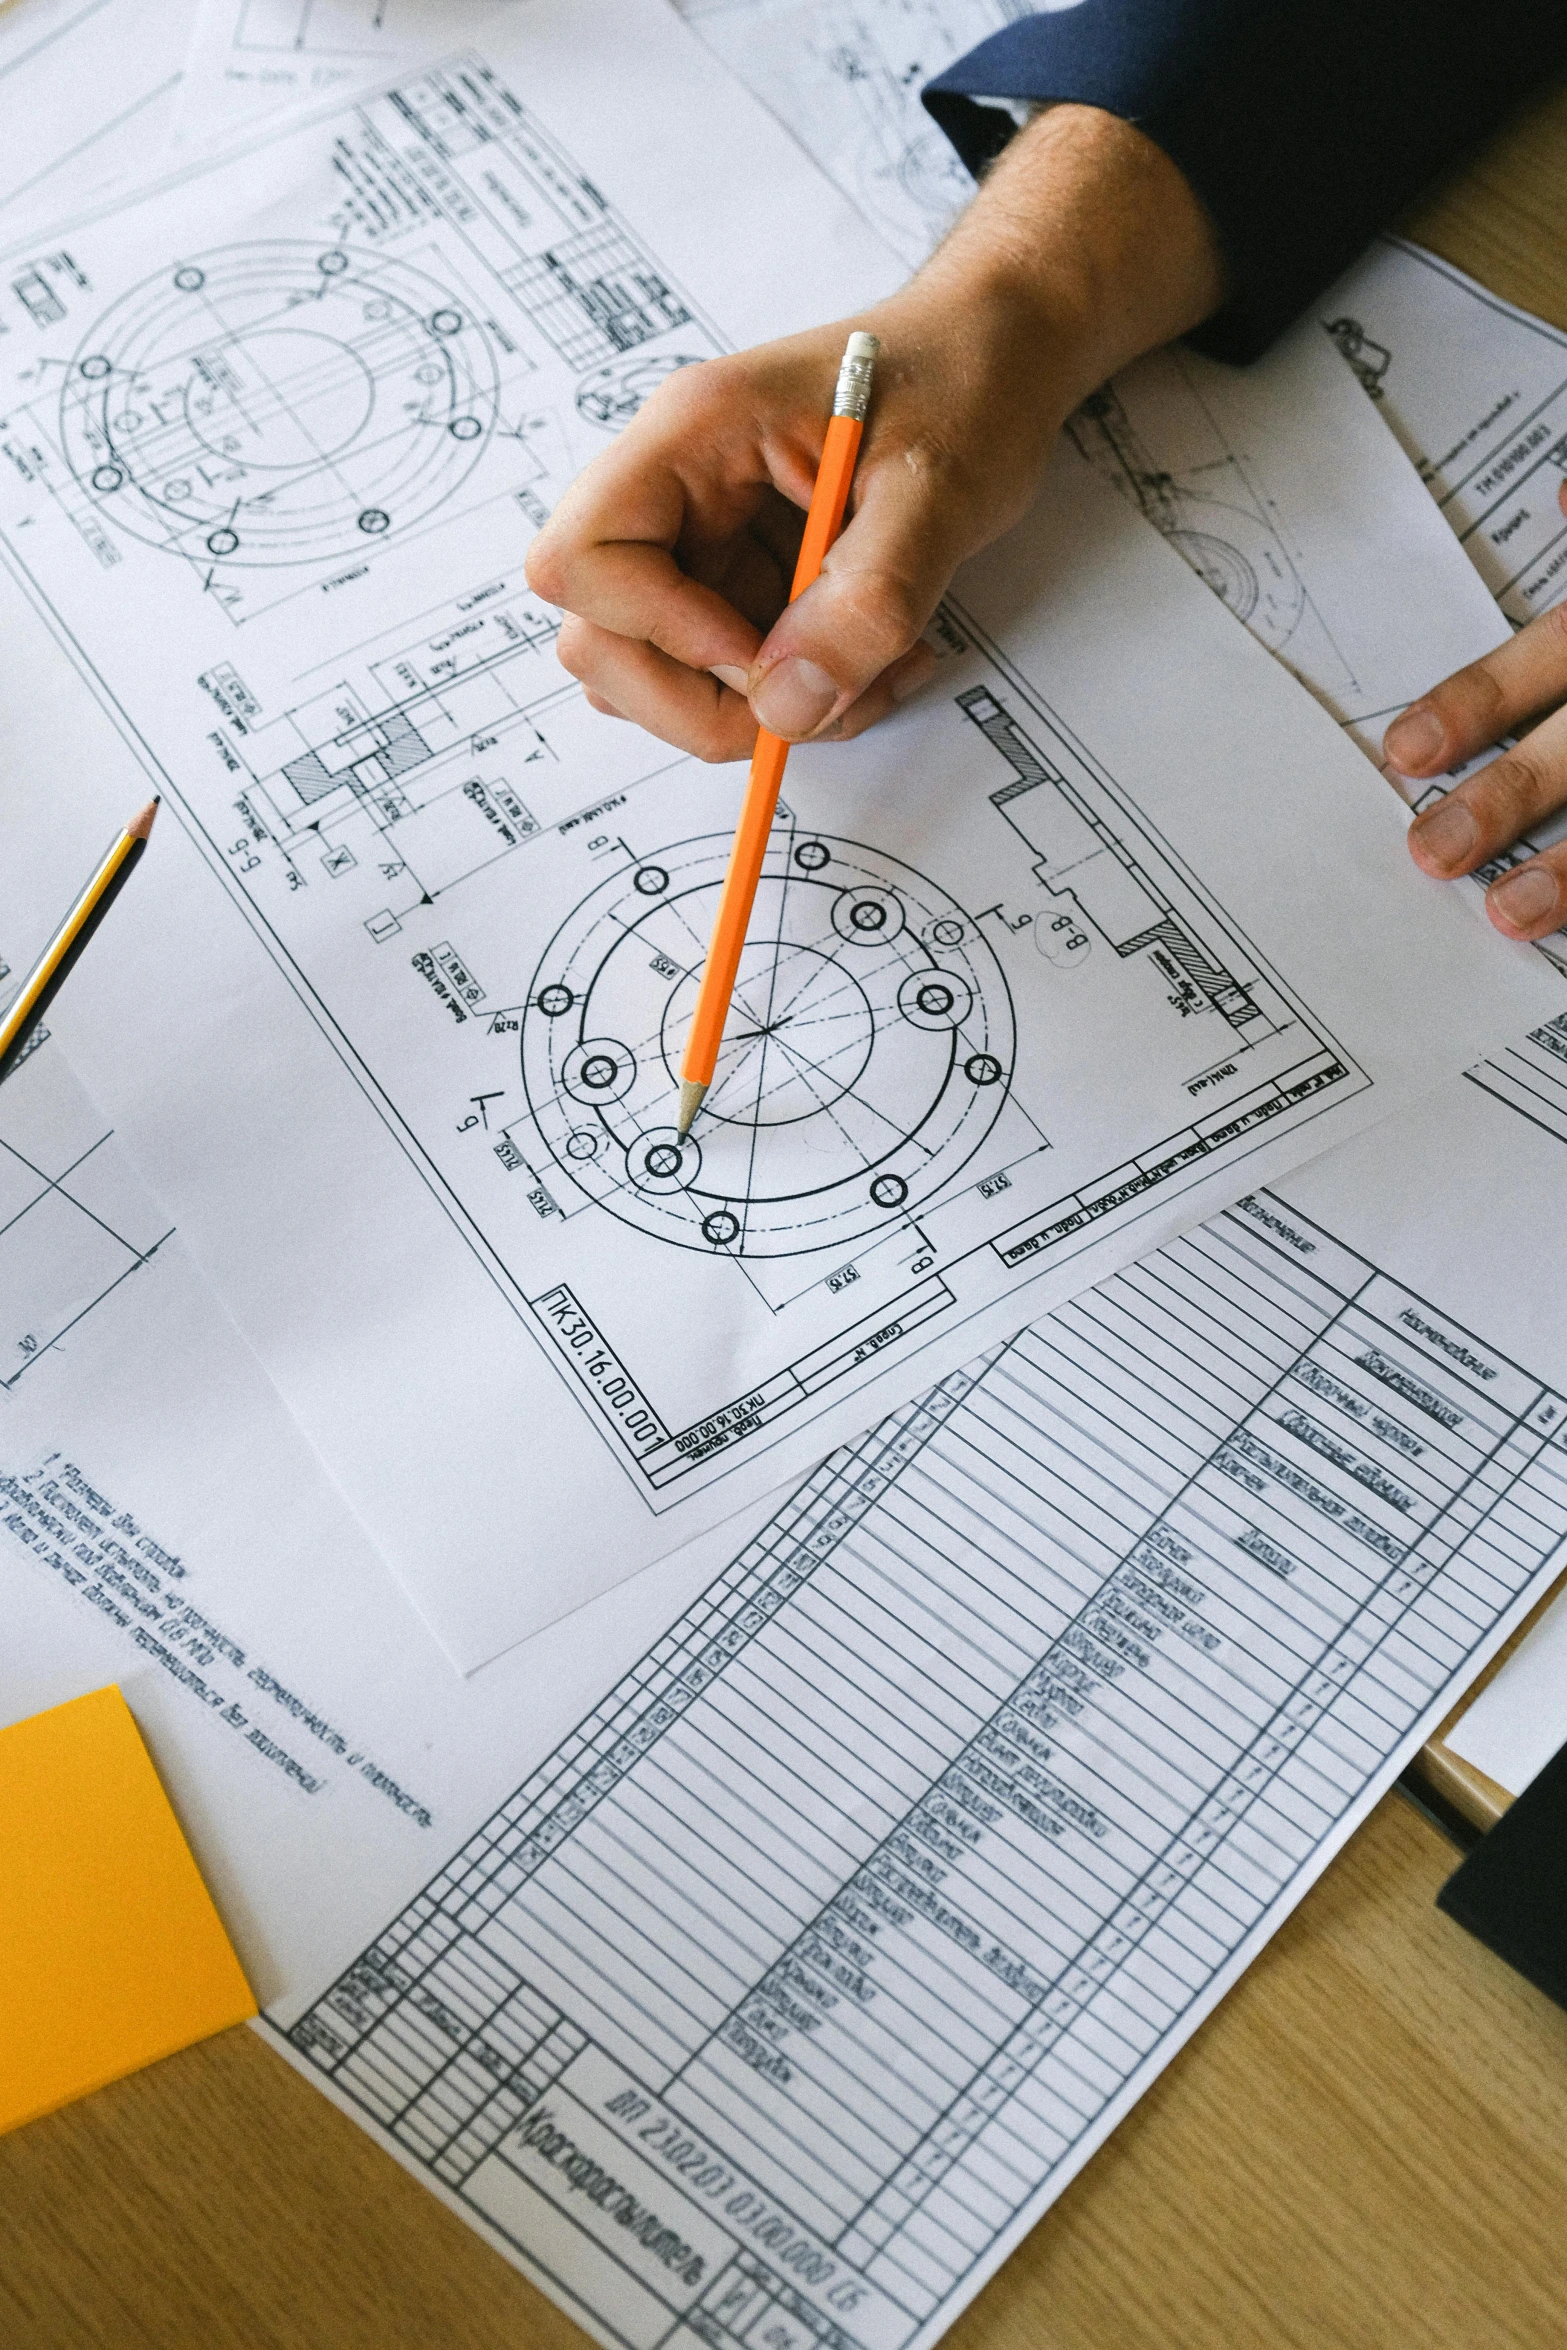 two people sitting at a table with blueprints and pencils, a detailed drawing, trending on unsplash, circular, mechanical hydraulics, inspect in inventory image, promo image